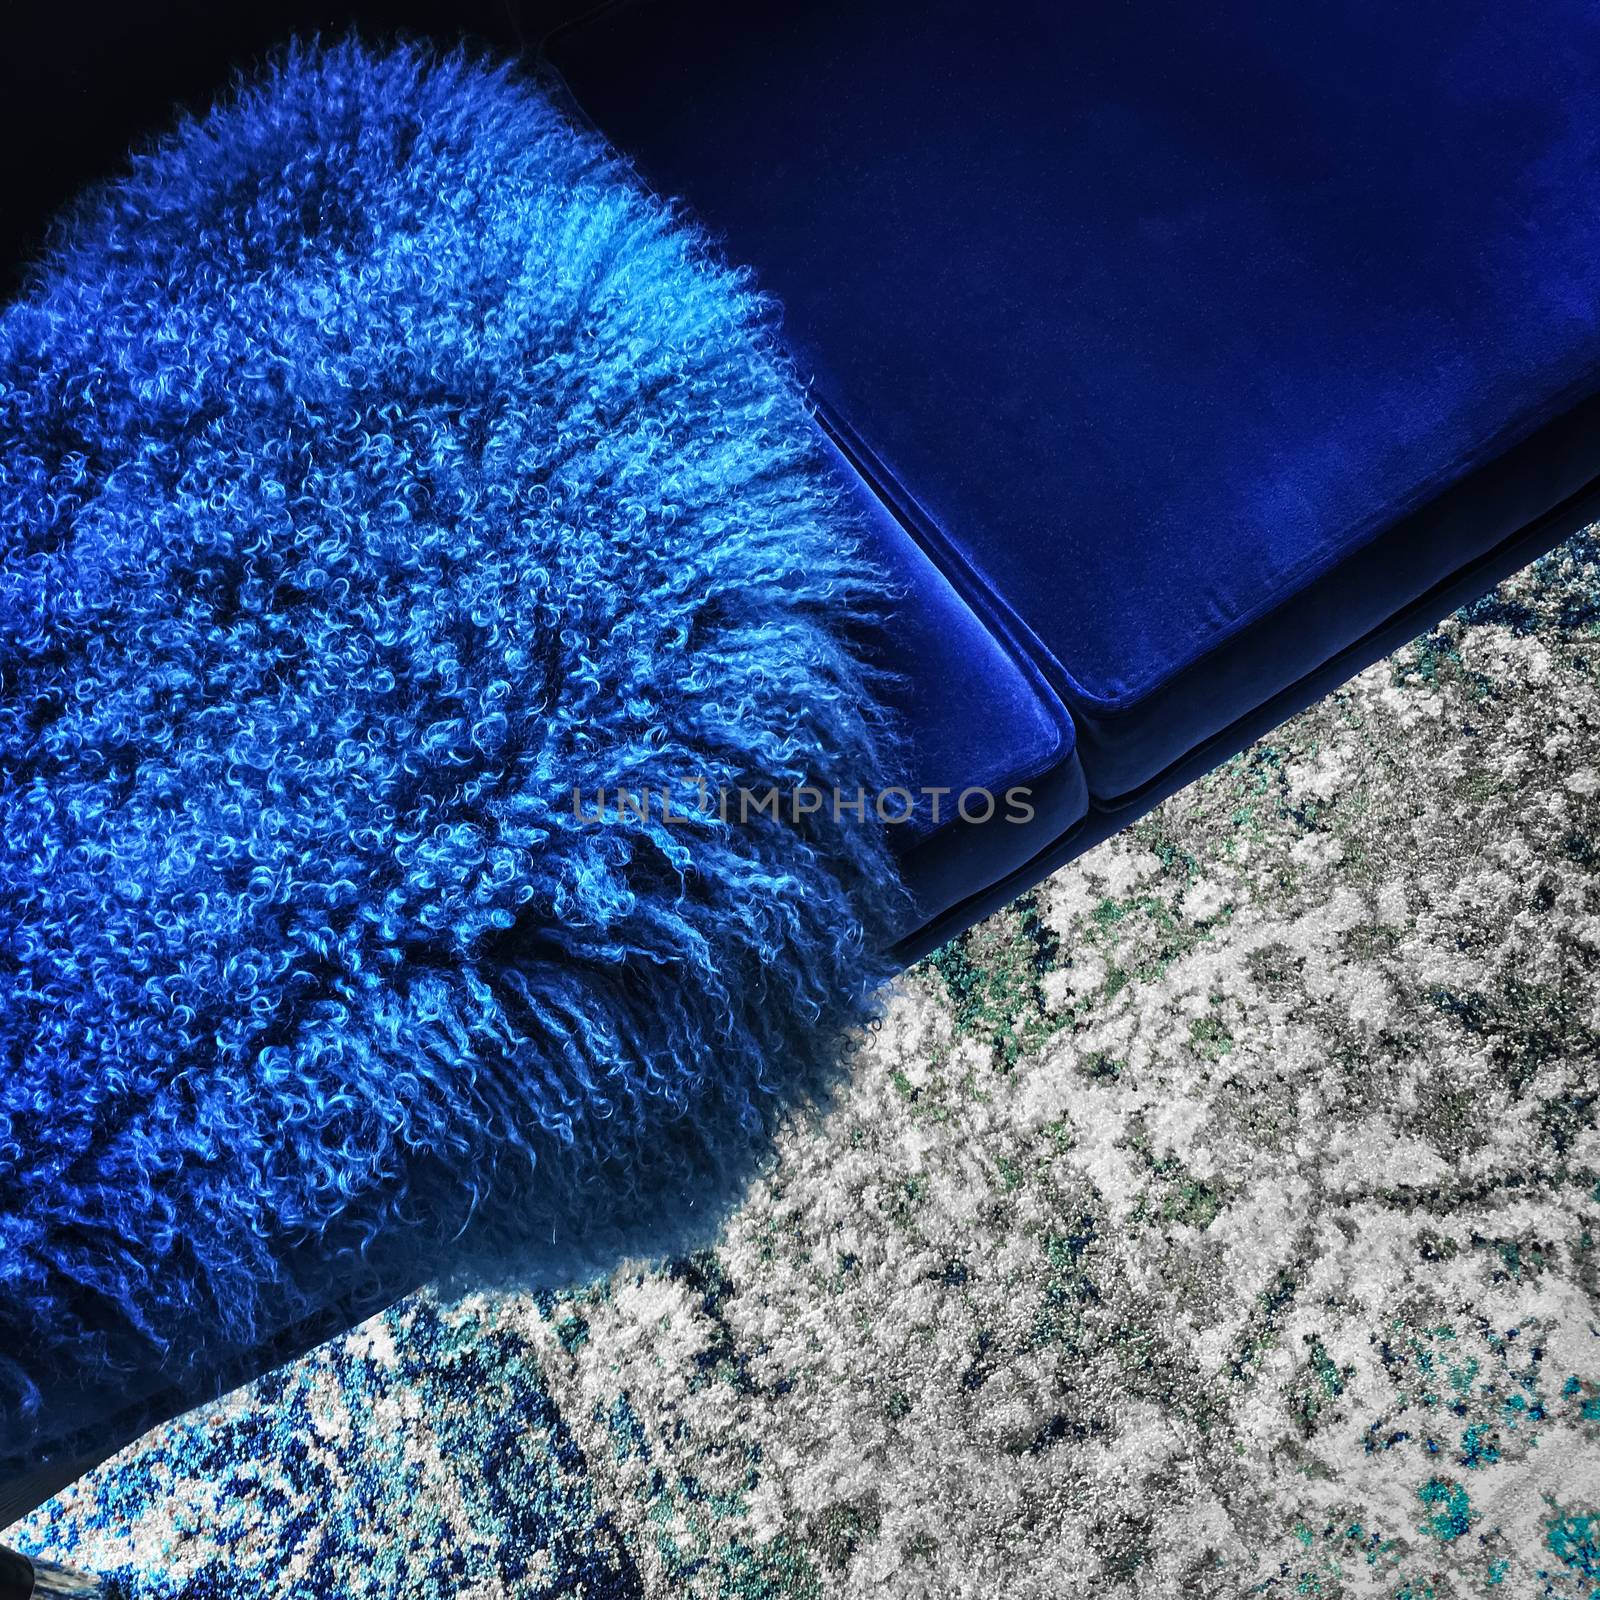 Blue colored sheep skin decorating a luxurious velvet sofa.